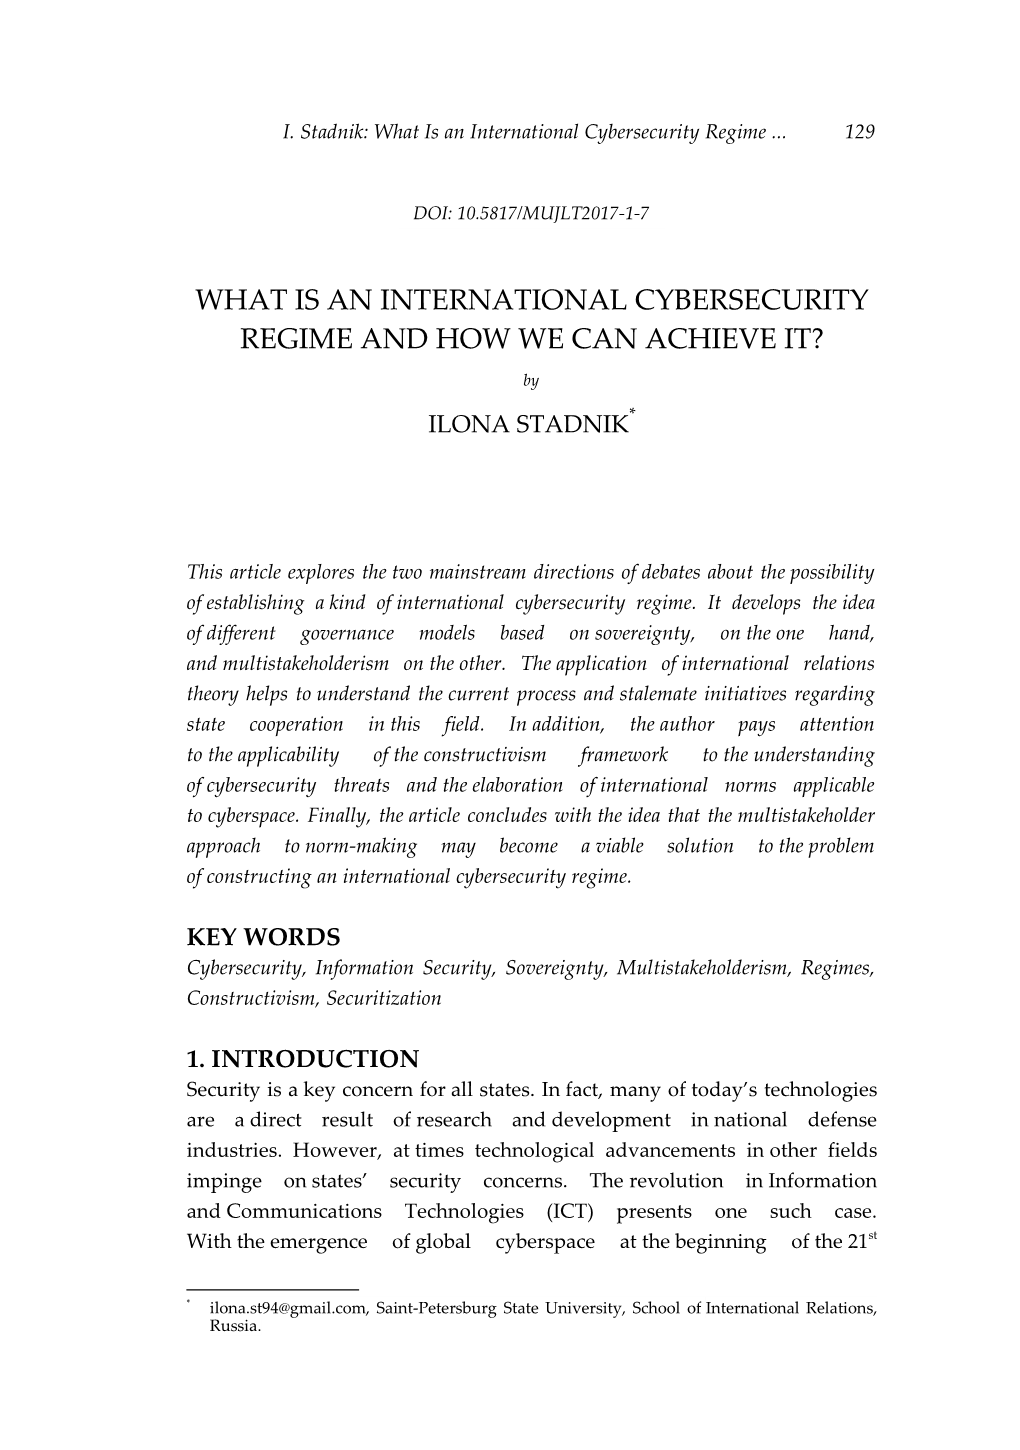 What Is an International Cybersecurity Regime and How We Can Achieve It?